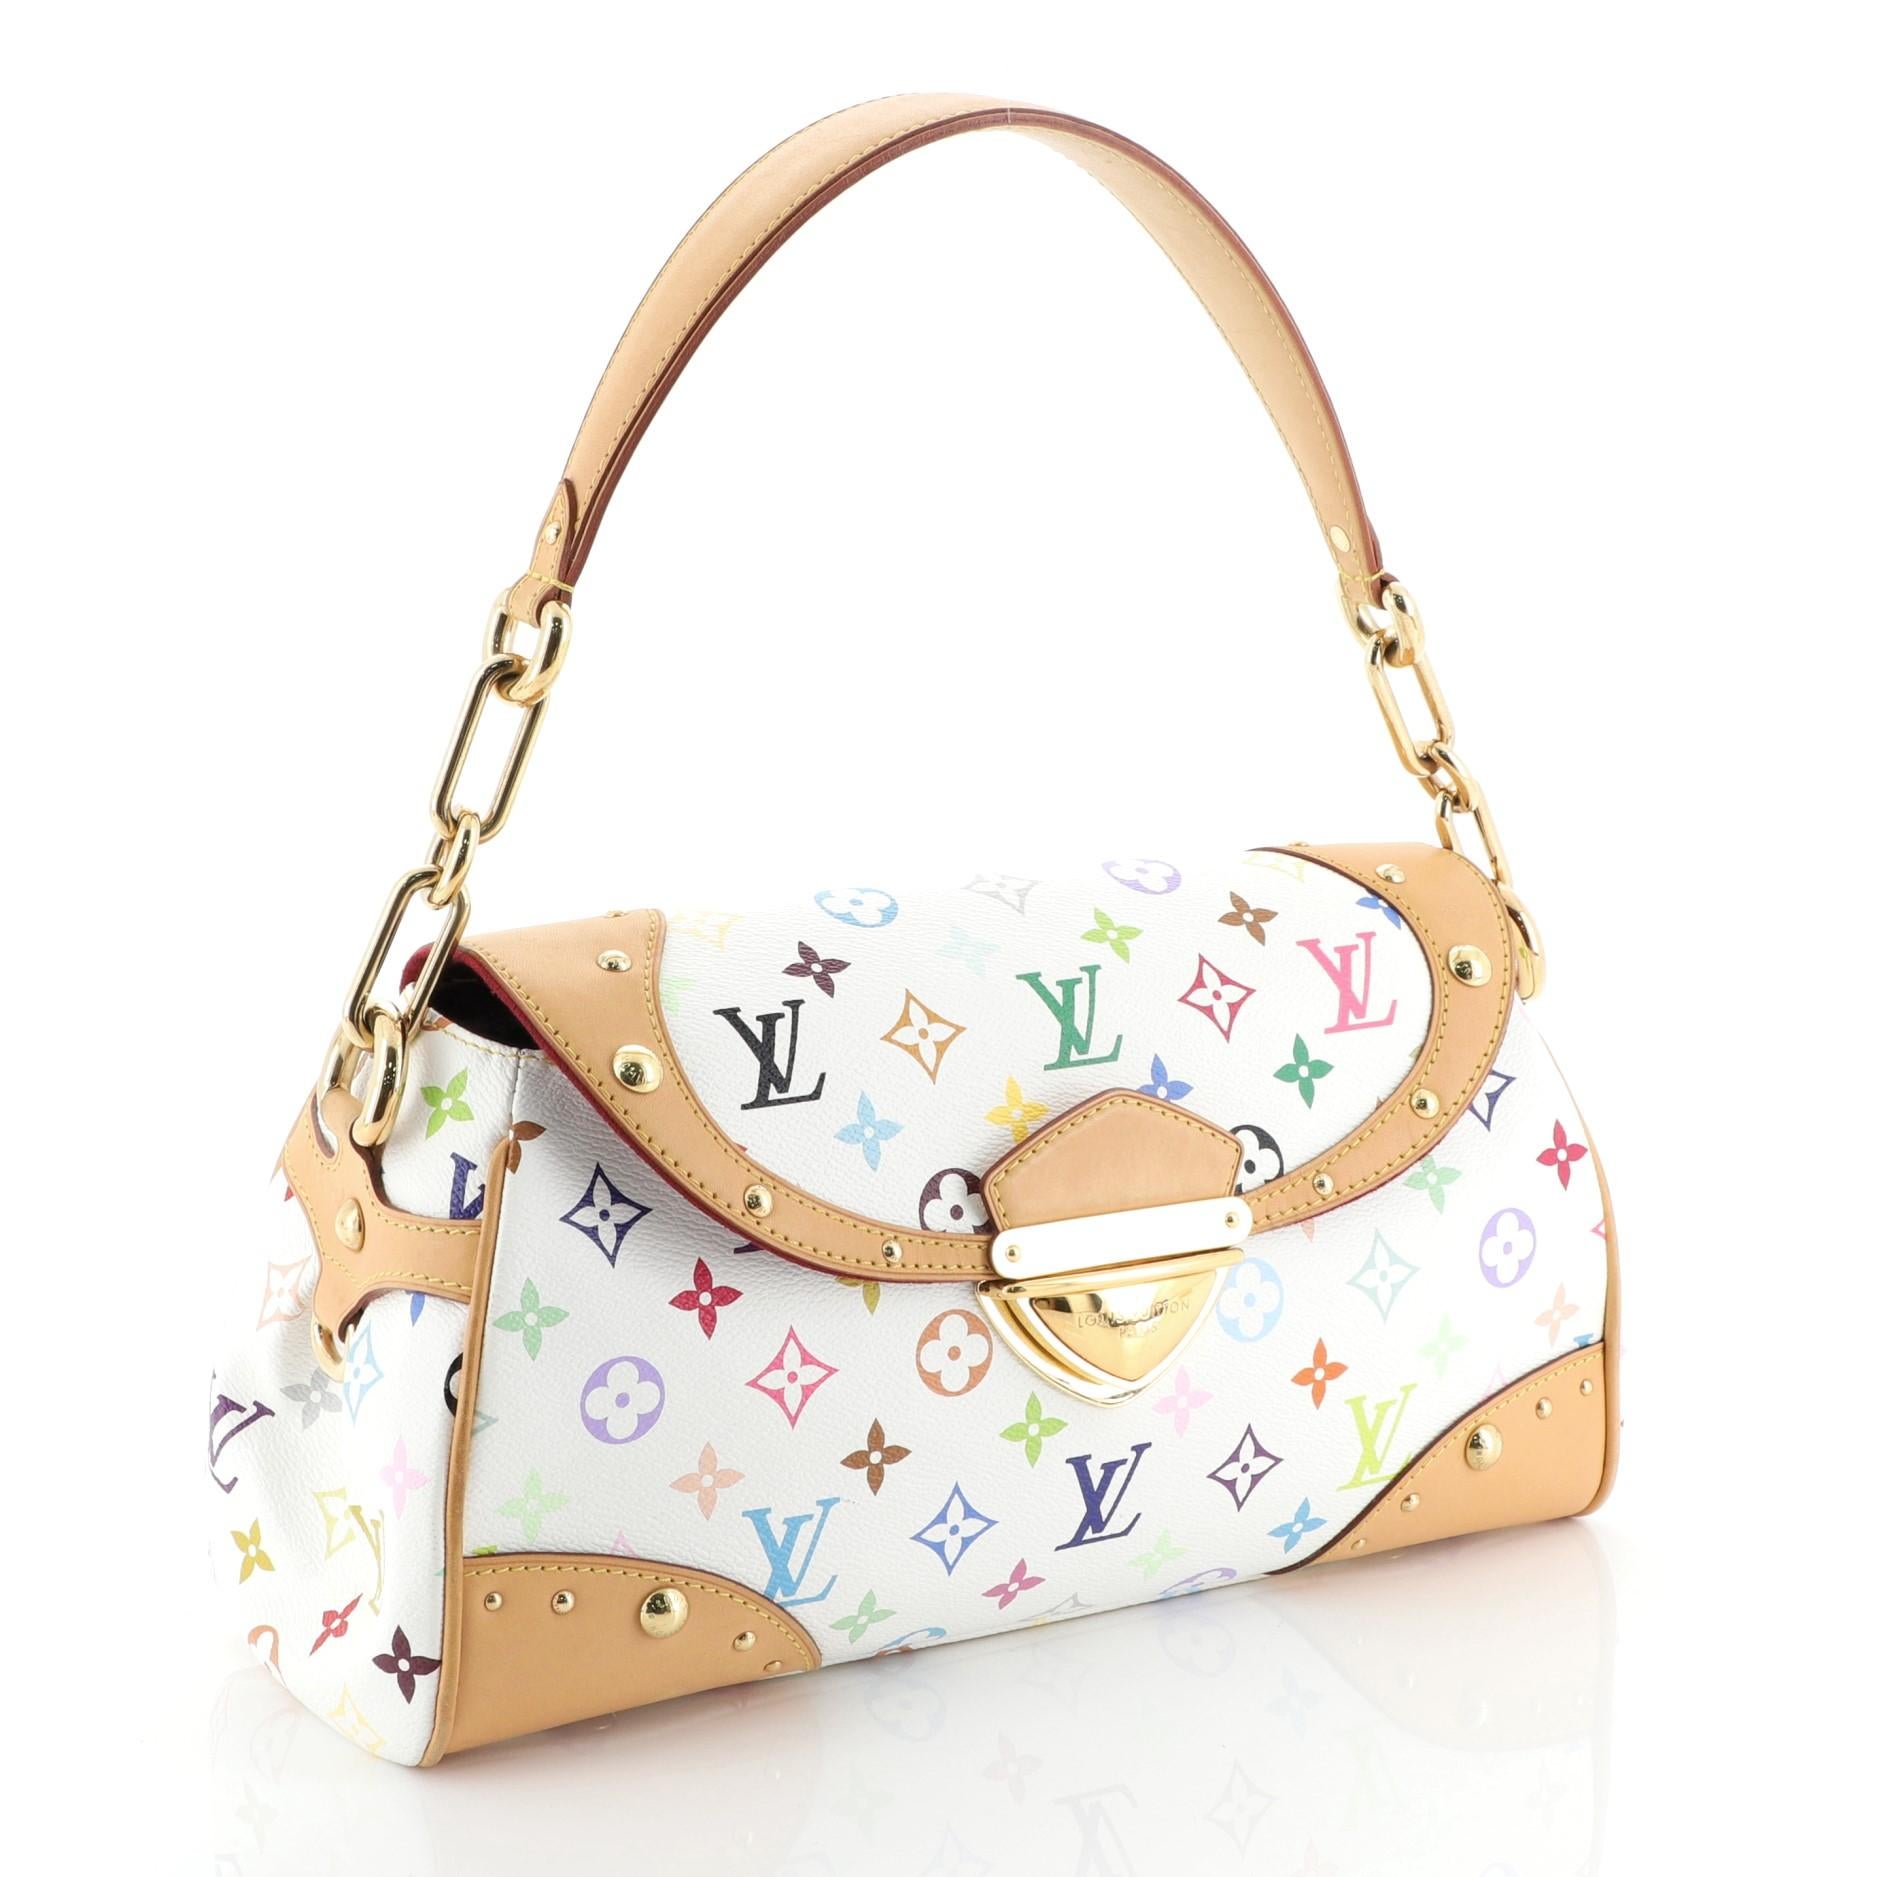 This Louis Vuitton Beverly Handbag Monogram Multicolor MM, crafted from white multicolor monogram coated canvas, features natural cowhide leather shoulder strap and gold-tone hardware. Its oversized push-lock closure opens to a red microfiber